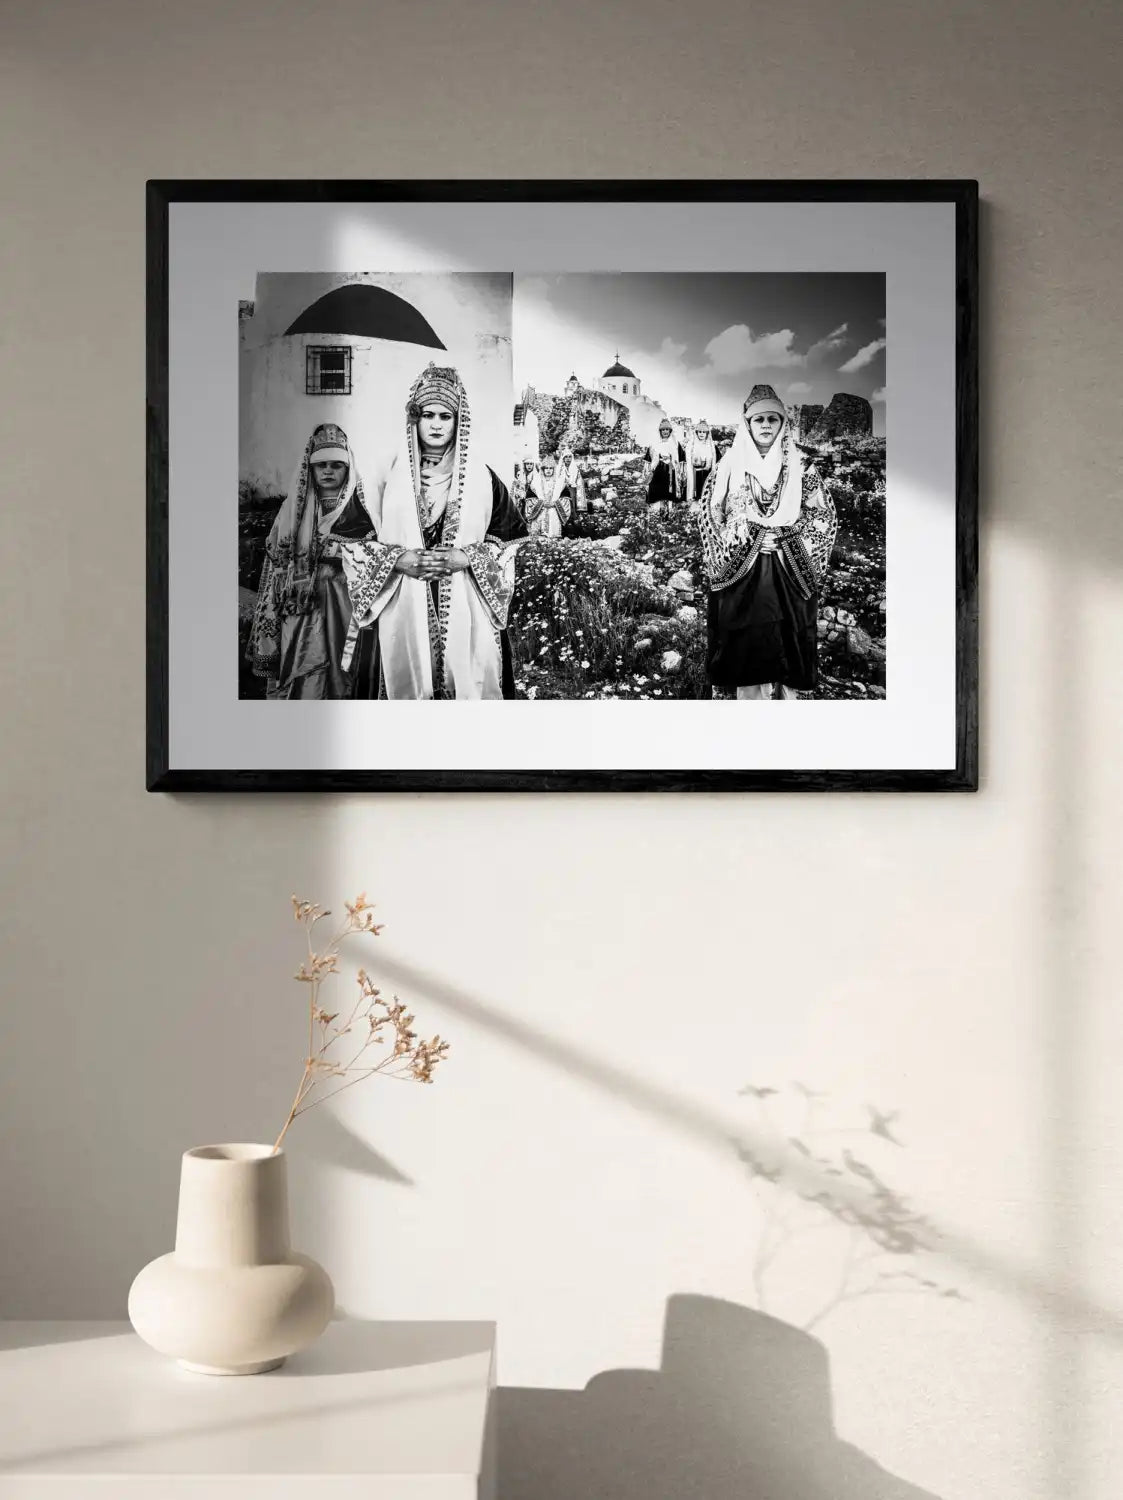 Black and White Photography Wall Art Greece | Costume of Astypalaea inside the castle Dodecanese Greece by George Tatakis - single framed photo